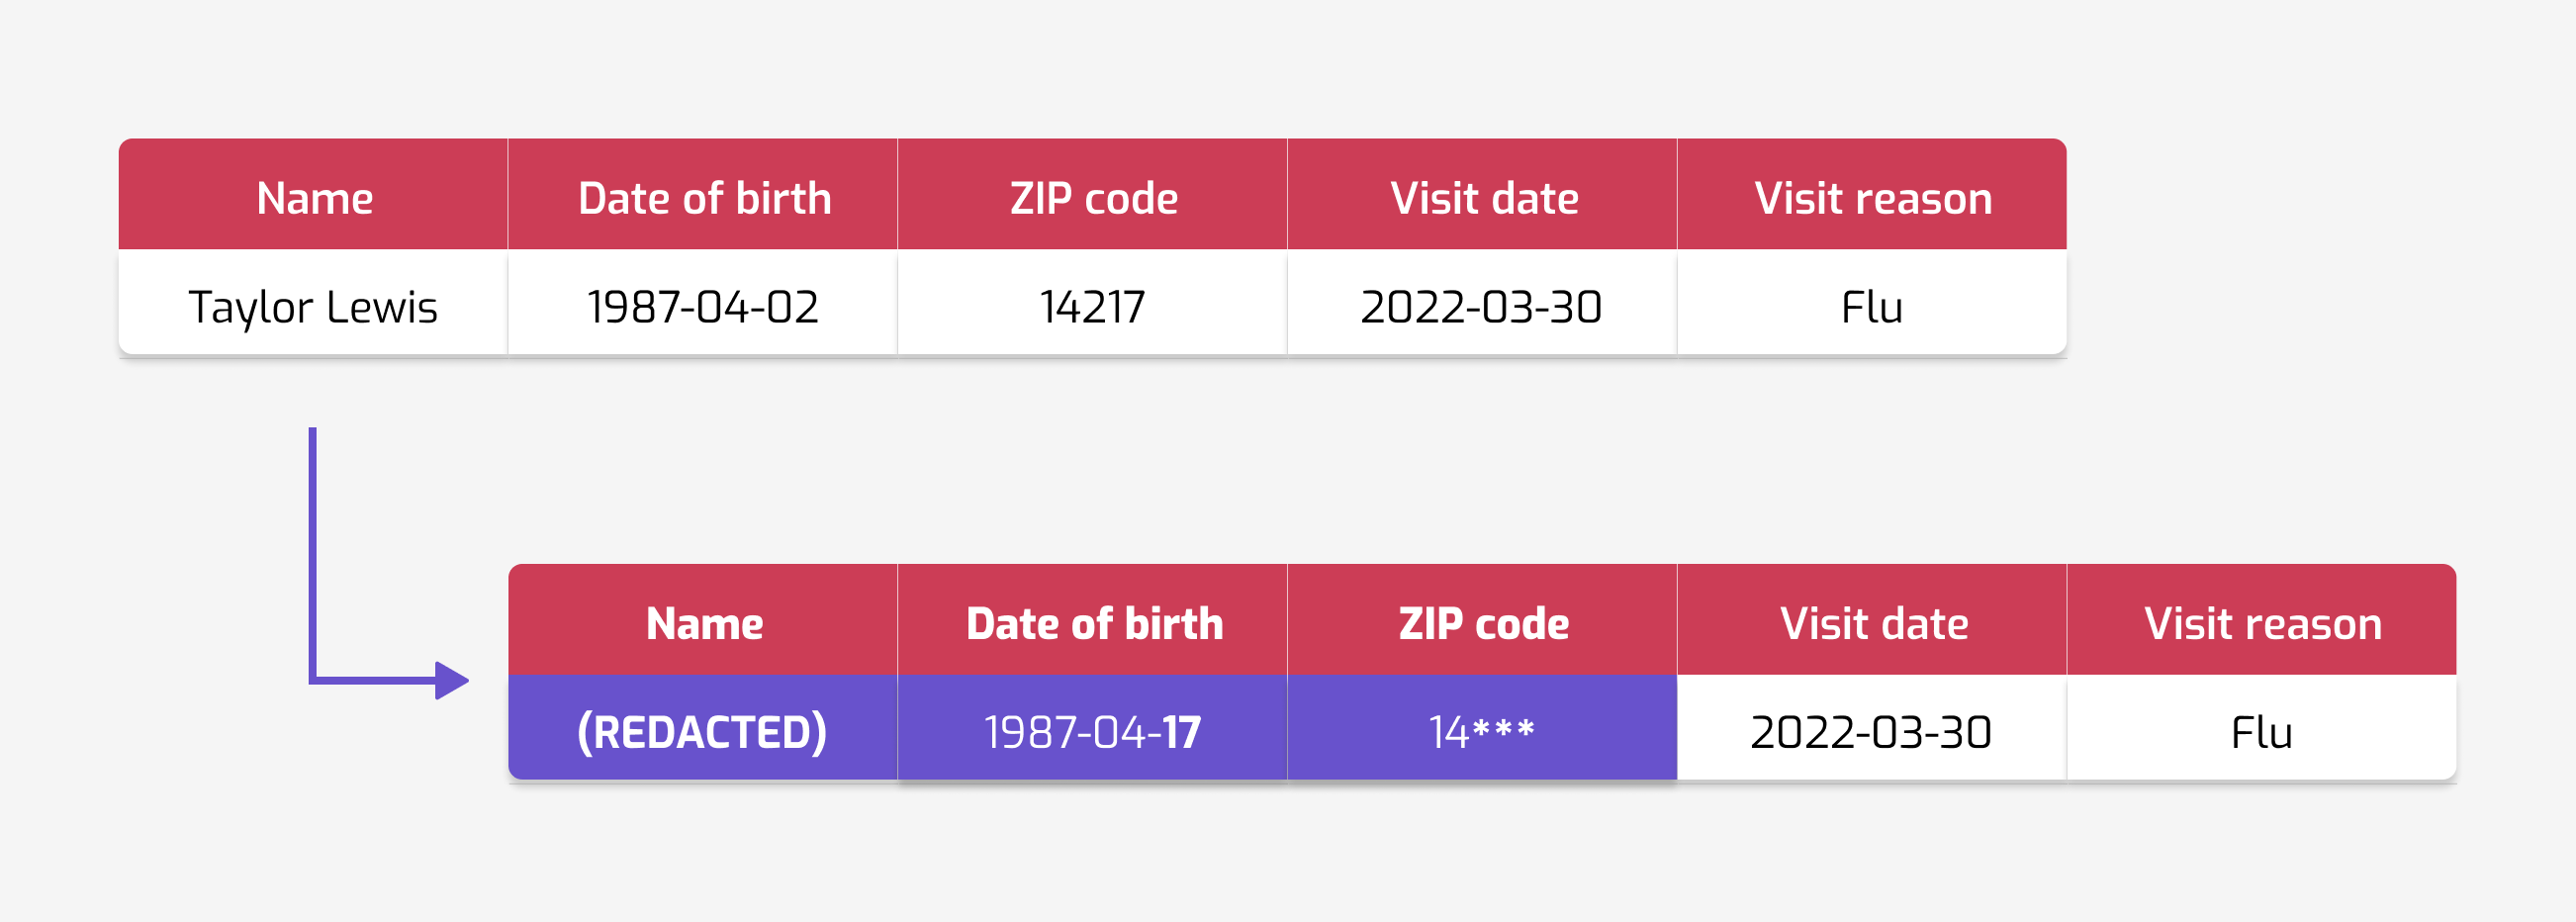 The same diagram as previously, except that in addition to redacting
the Name column, the Date of birth column has been replaced with 1987-04-17 (a
slightly different date than the original one), and the ZIP code column has been
replaced with 14***.